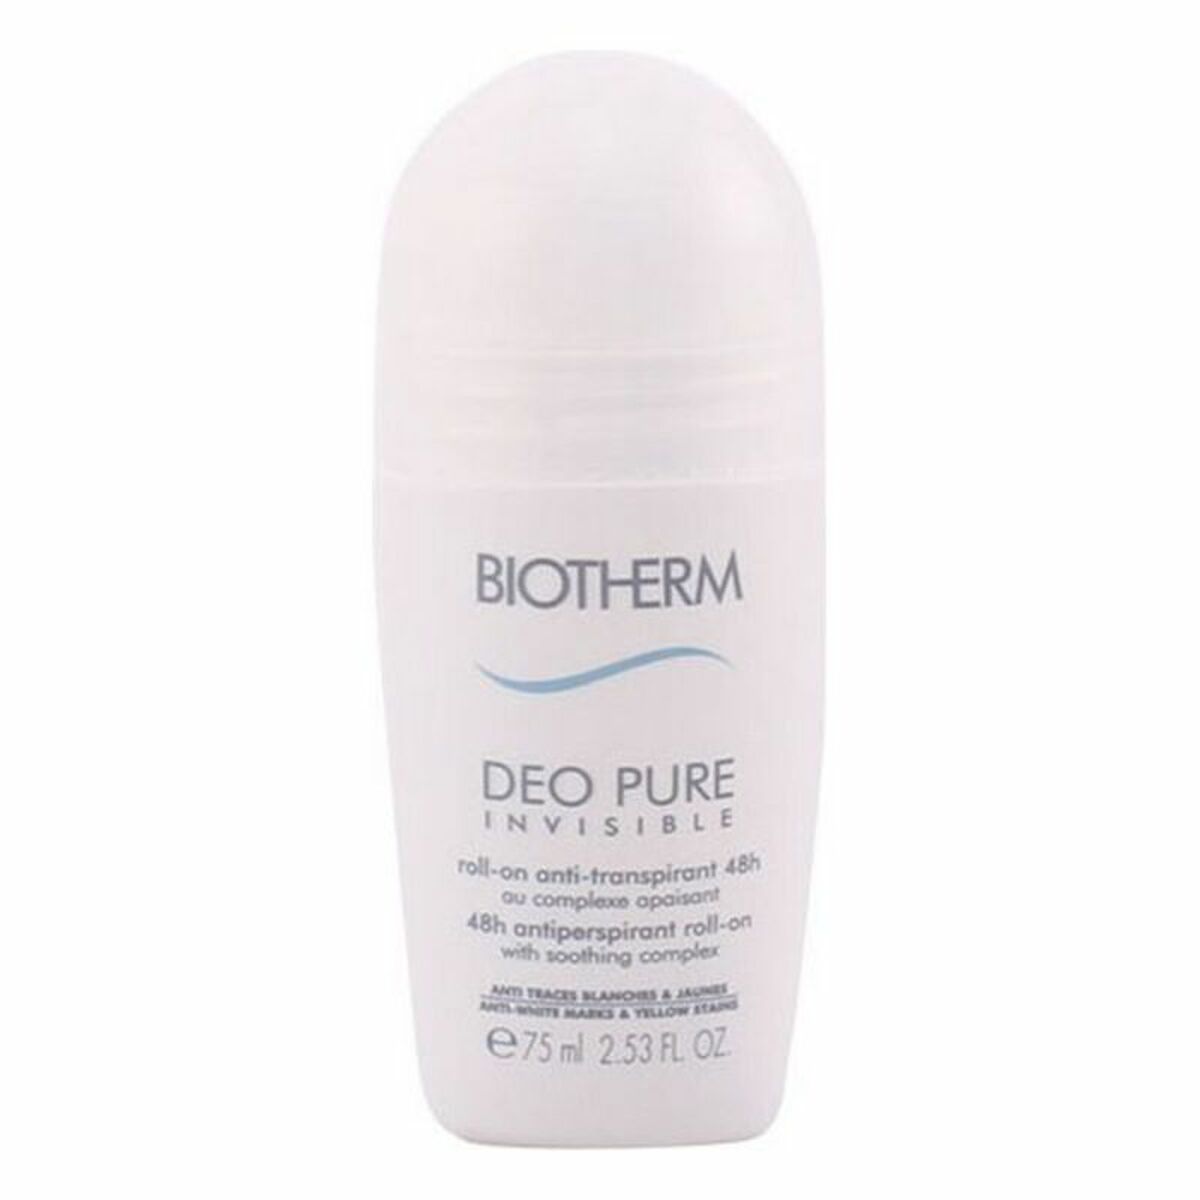 Deodorante Roll-on Deo Pure Invisible Biotherm (75 ml)